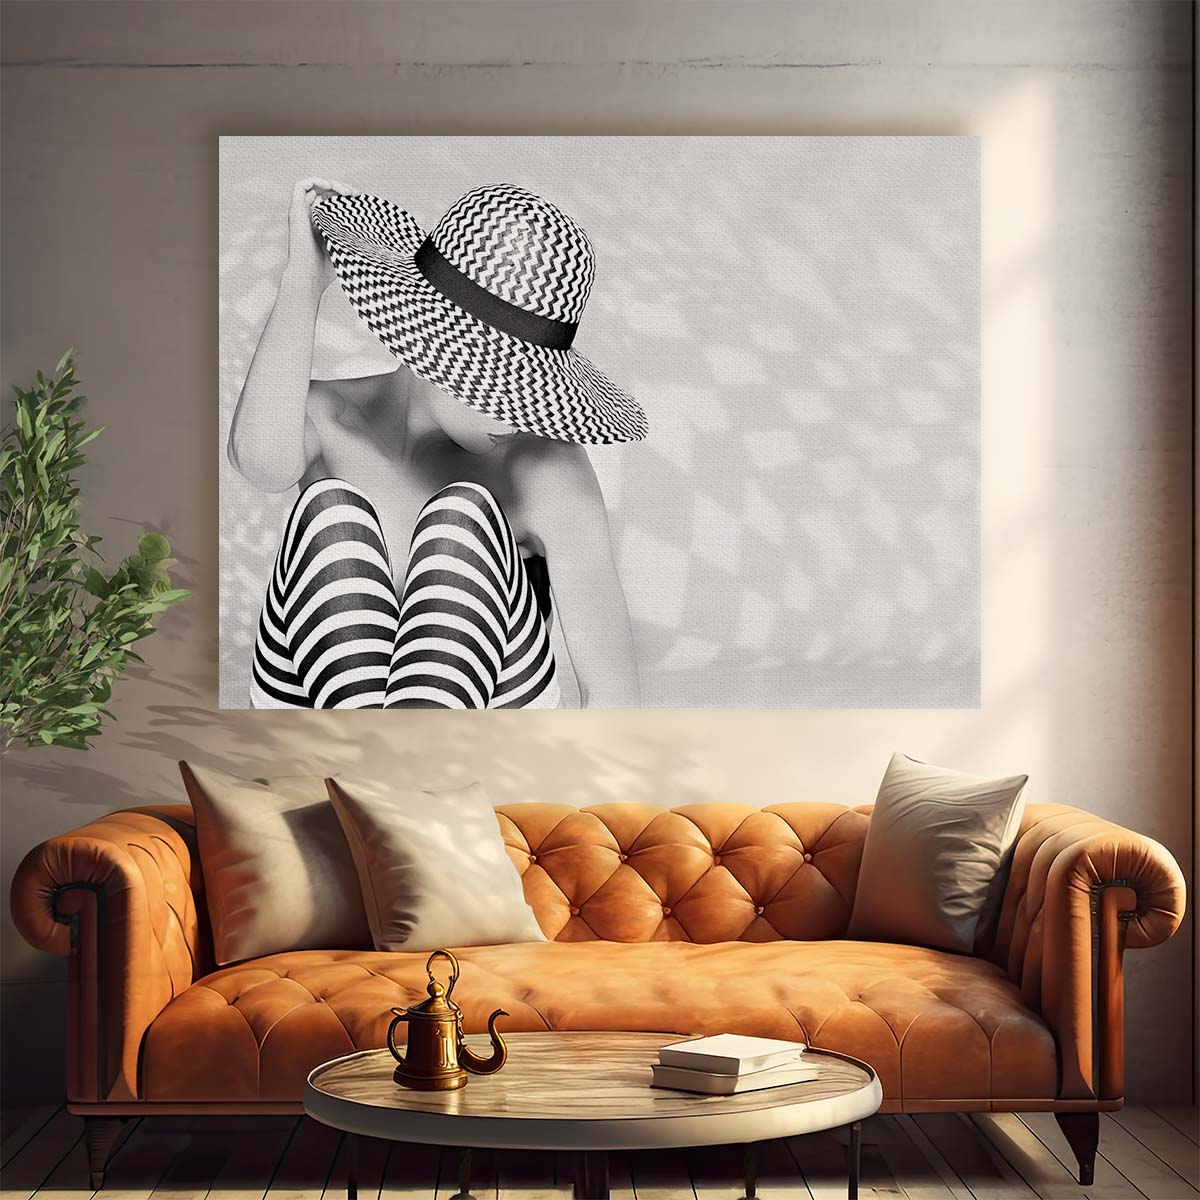 Monochrome ZebraPatterned Woman Portrait Wall Art by Luxuriance Designs. Made in USA.